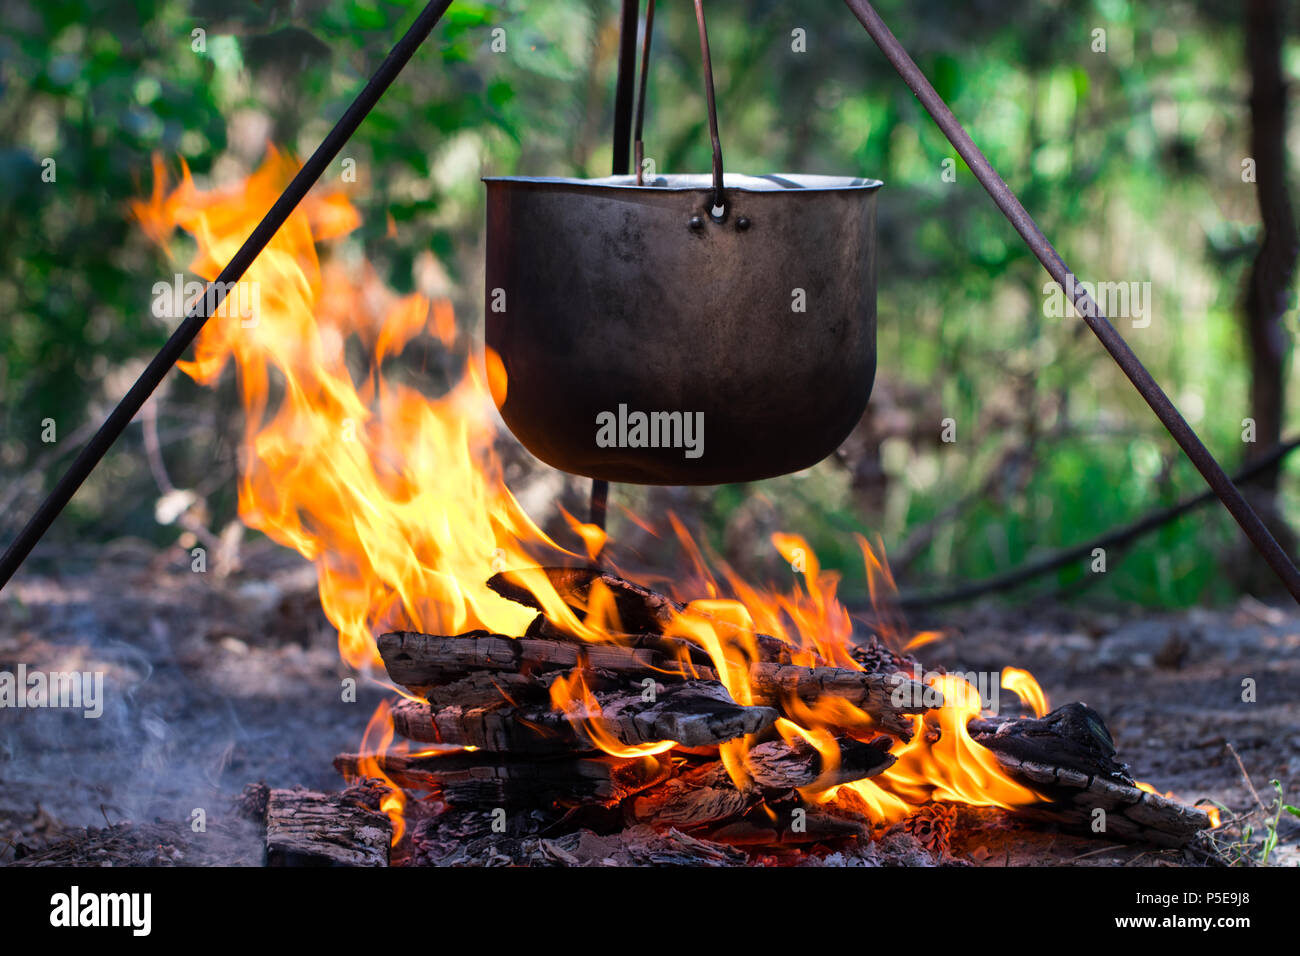 https://c8.alamy.com/comp/P5E9J8/tourist-pot-hanging-over-the-fire-on-a-tripod-cooking-in-the-campaign-P5E9J8.jpg